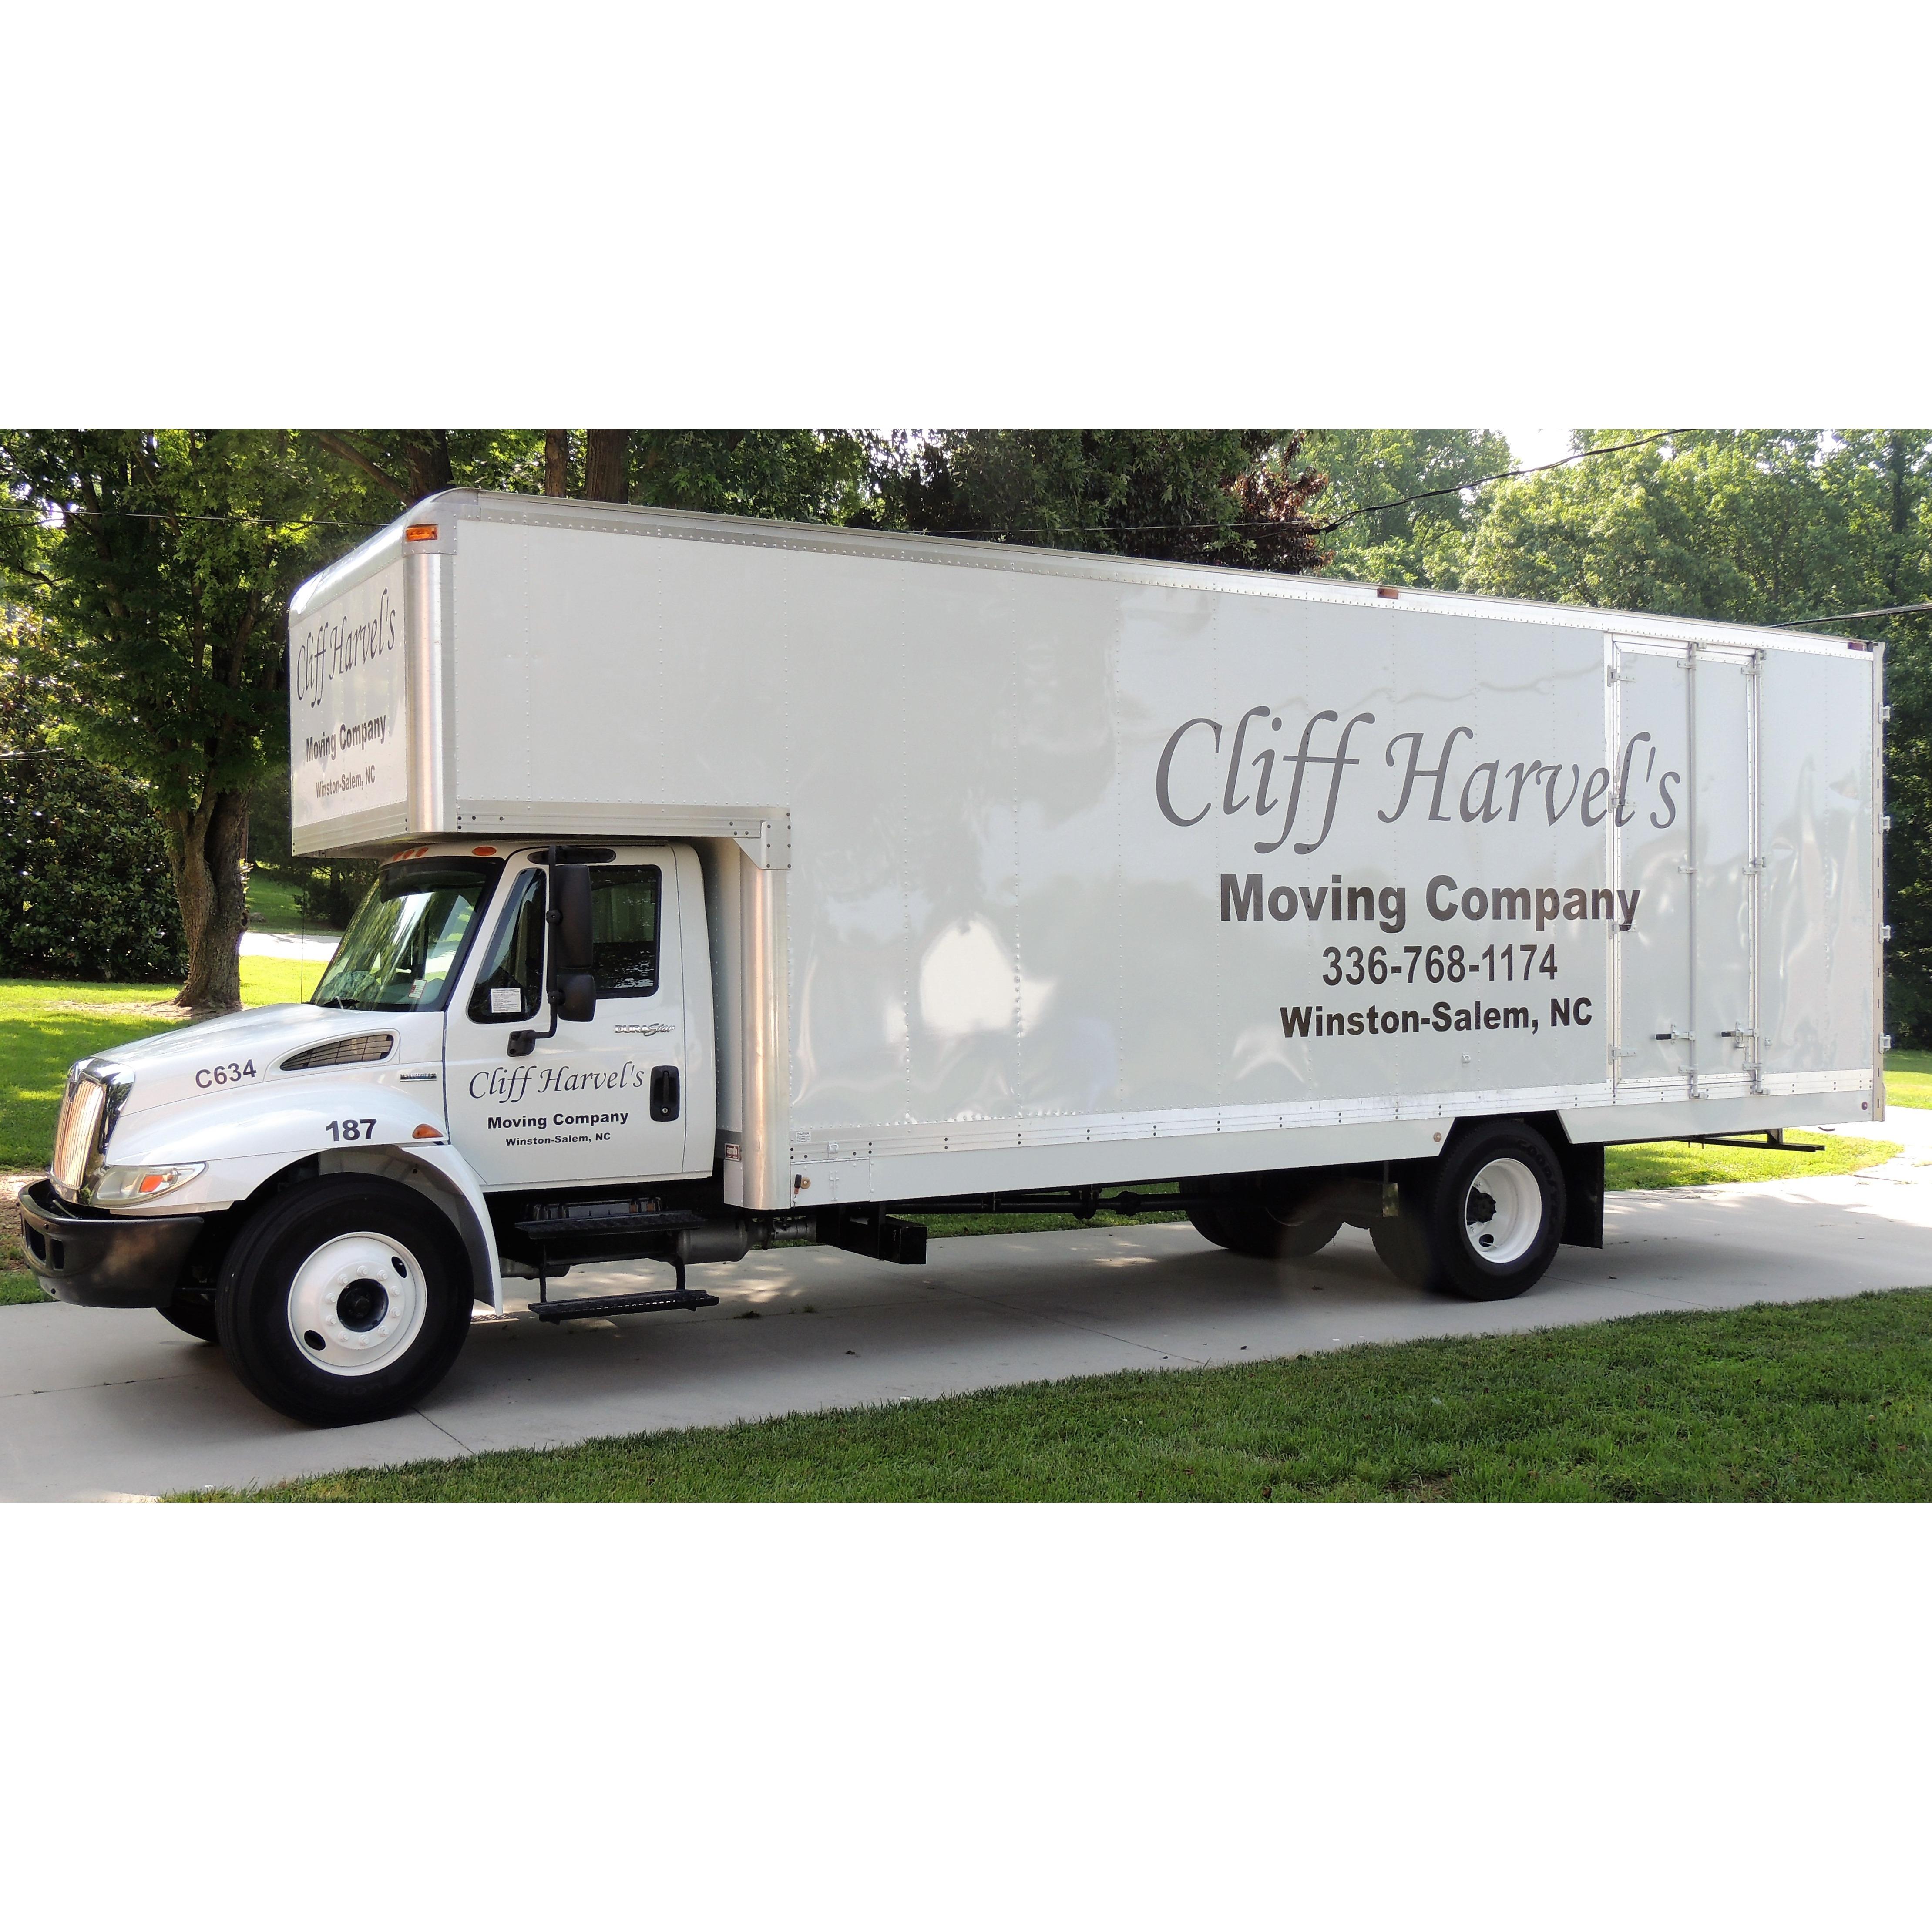 Cliff Harvel's Moving Co Inc - Kernersville, NC 27284 - (336)768-1174 | ShowMeLocal.com